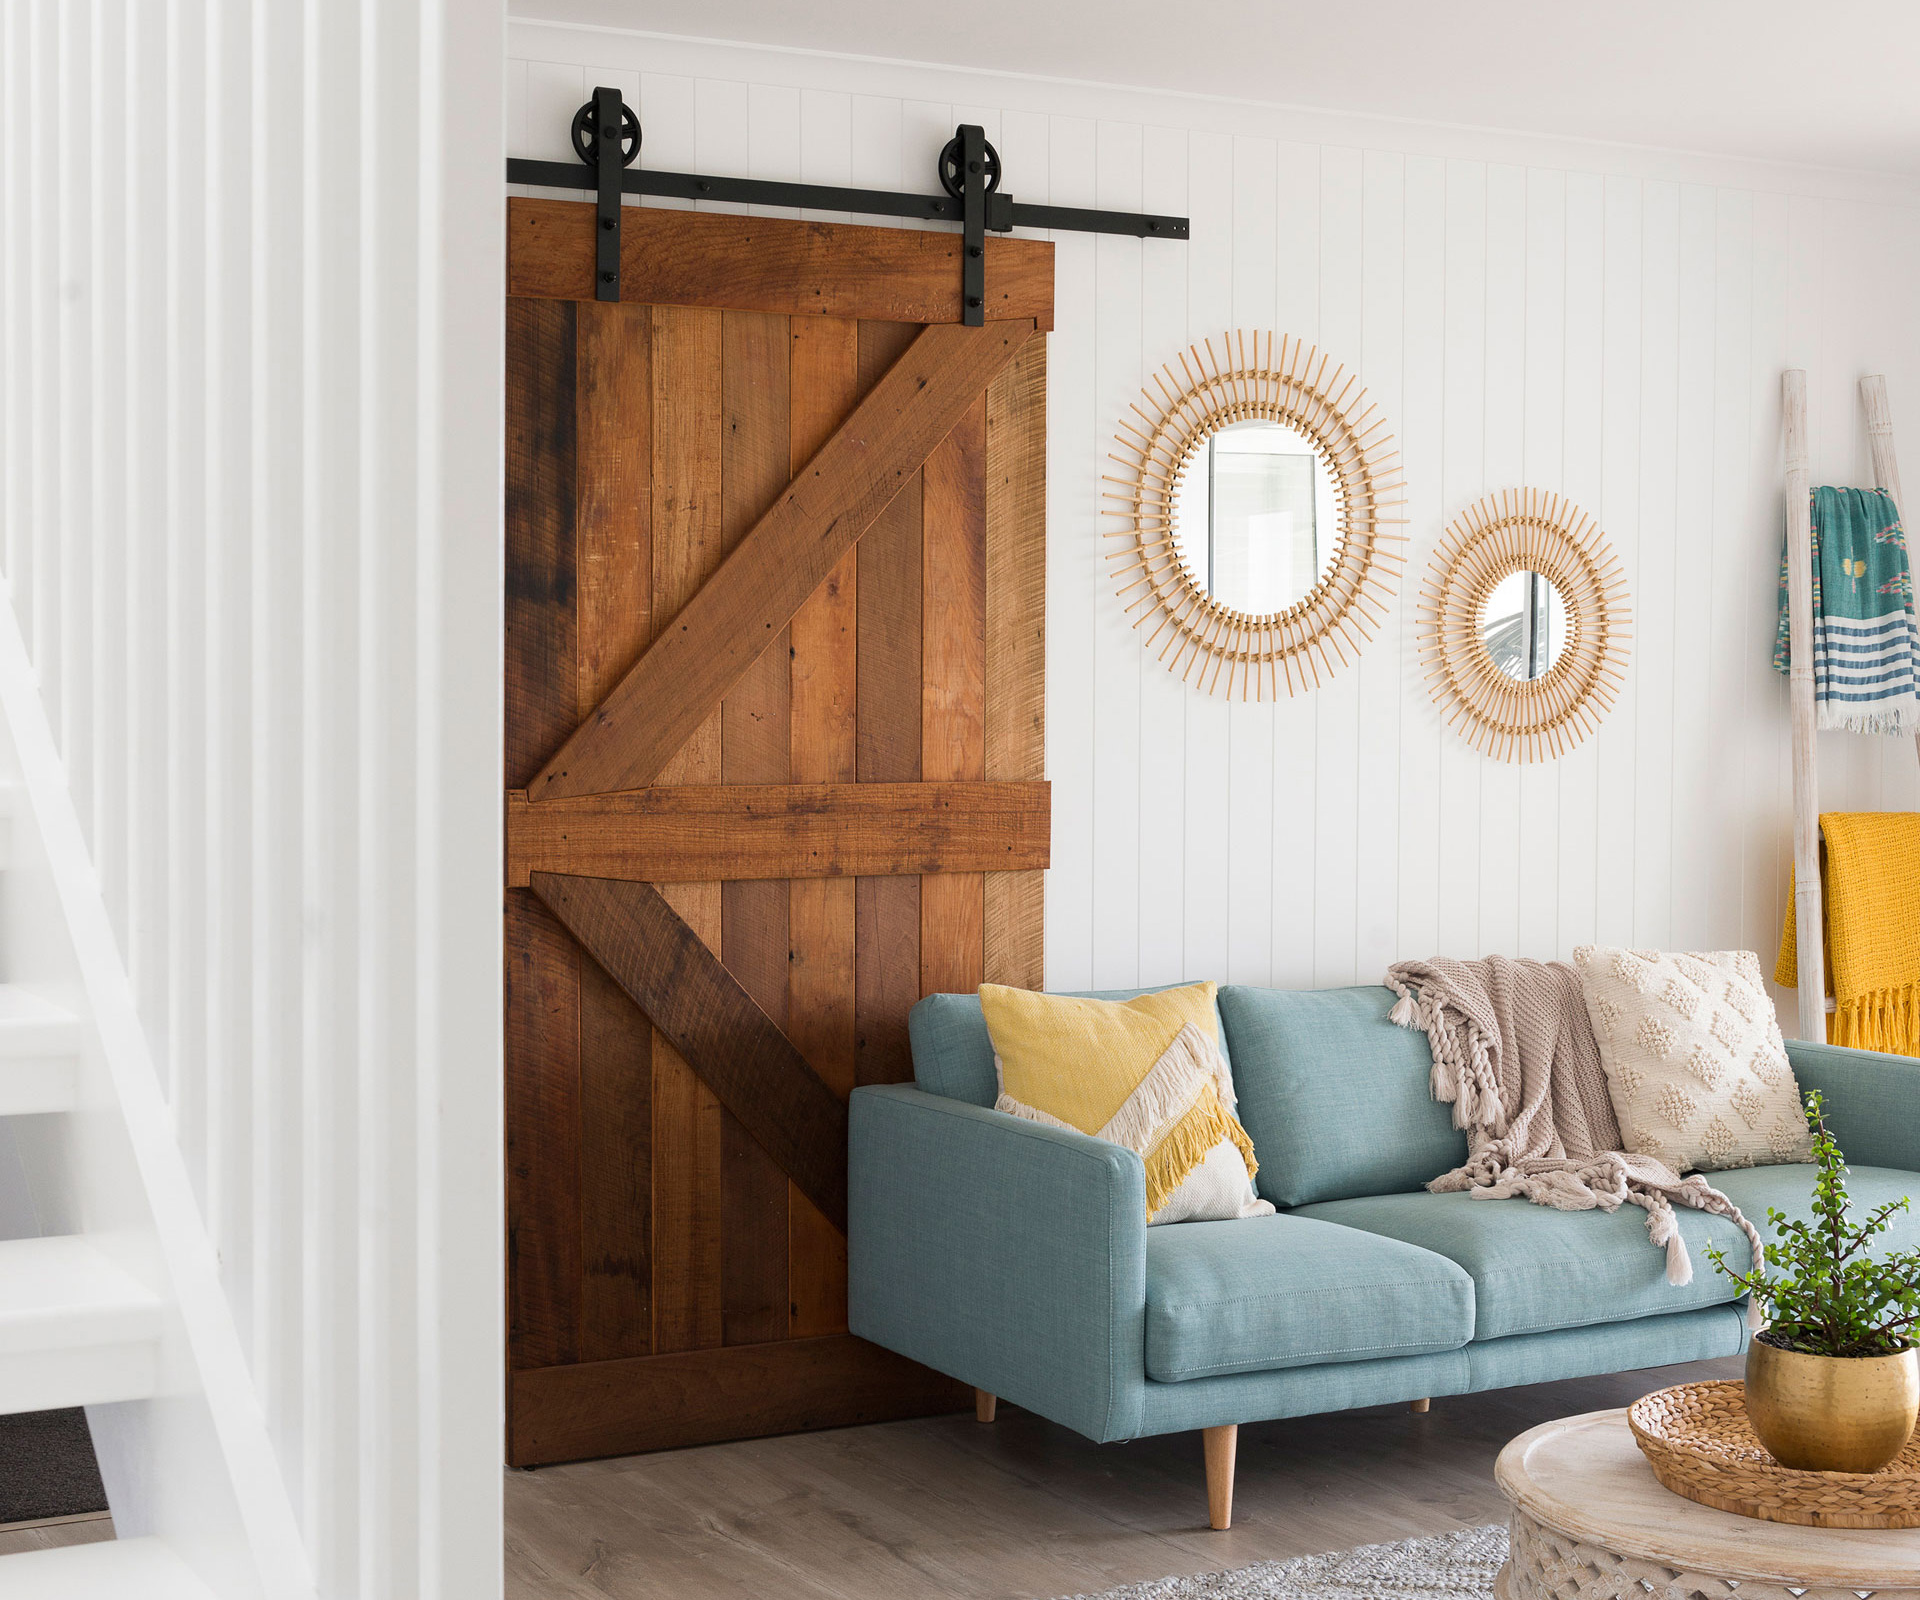 12 homes that prove barn doors aren't just for the countryside